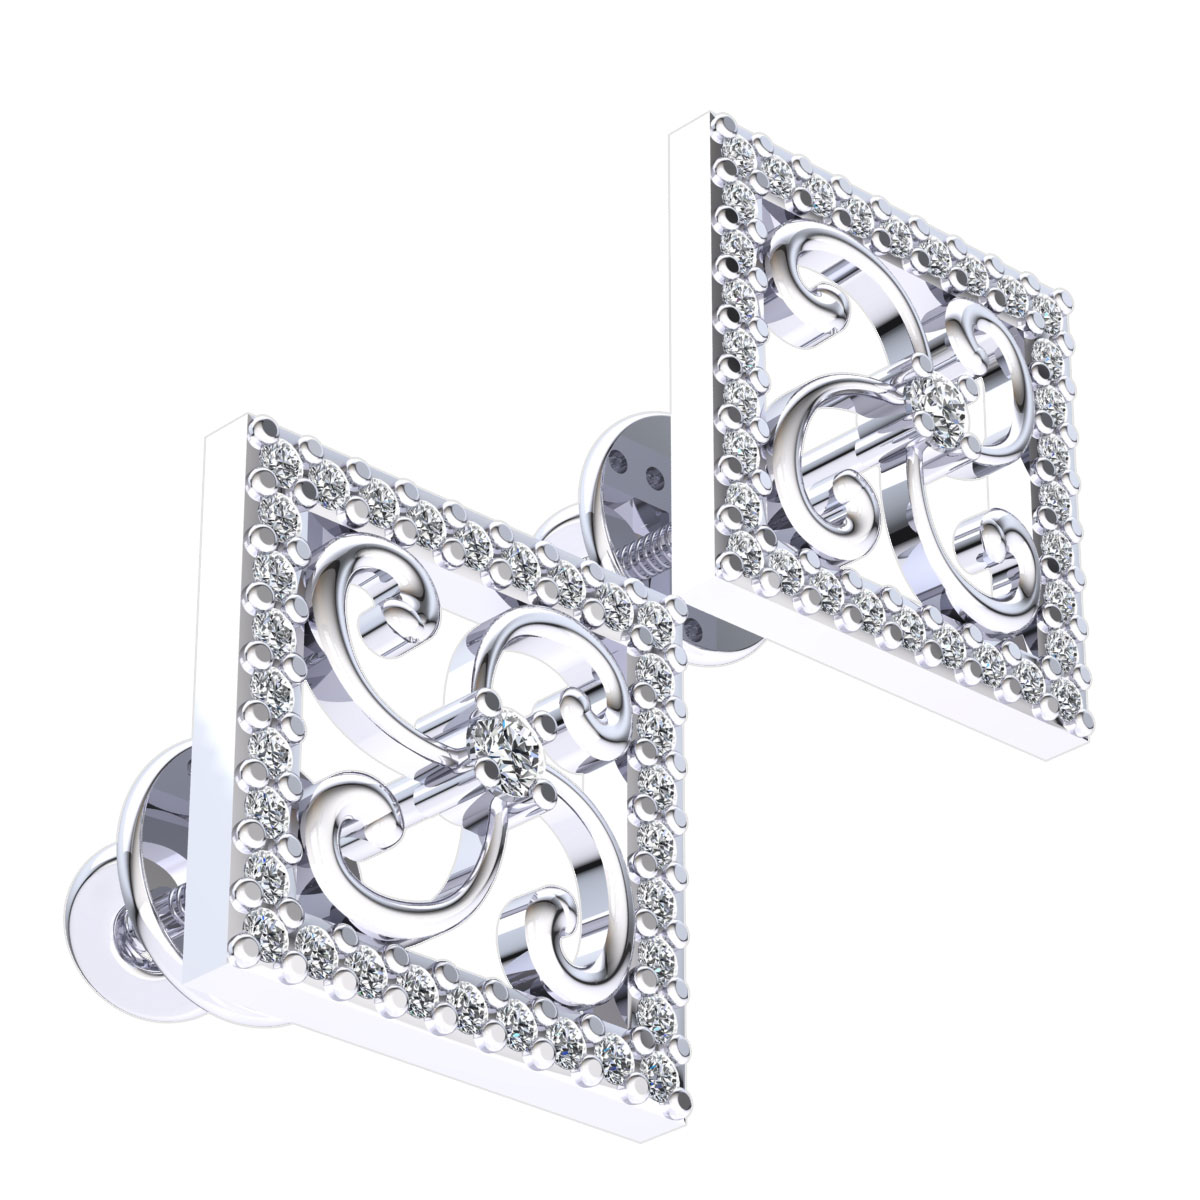 Details about   0.2carat Genuine Round Cut Diamond Ladies Square Studs Earrings Solid 14K Gold 